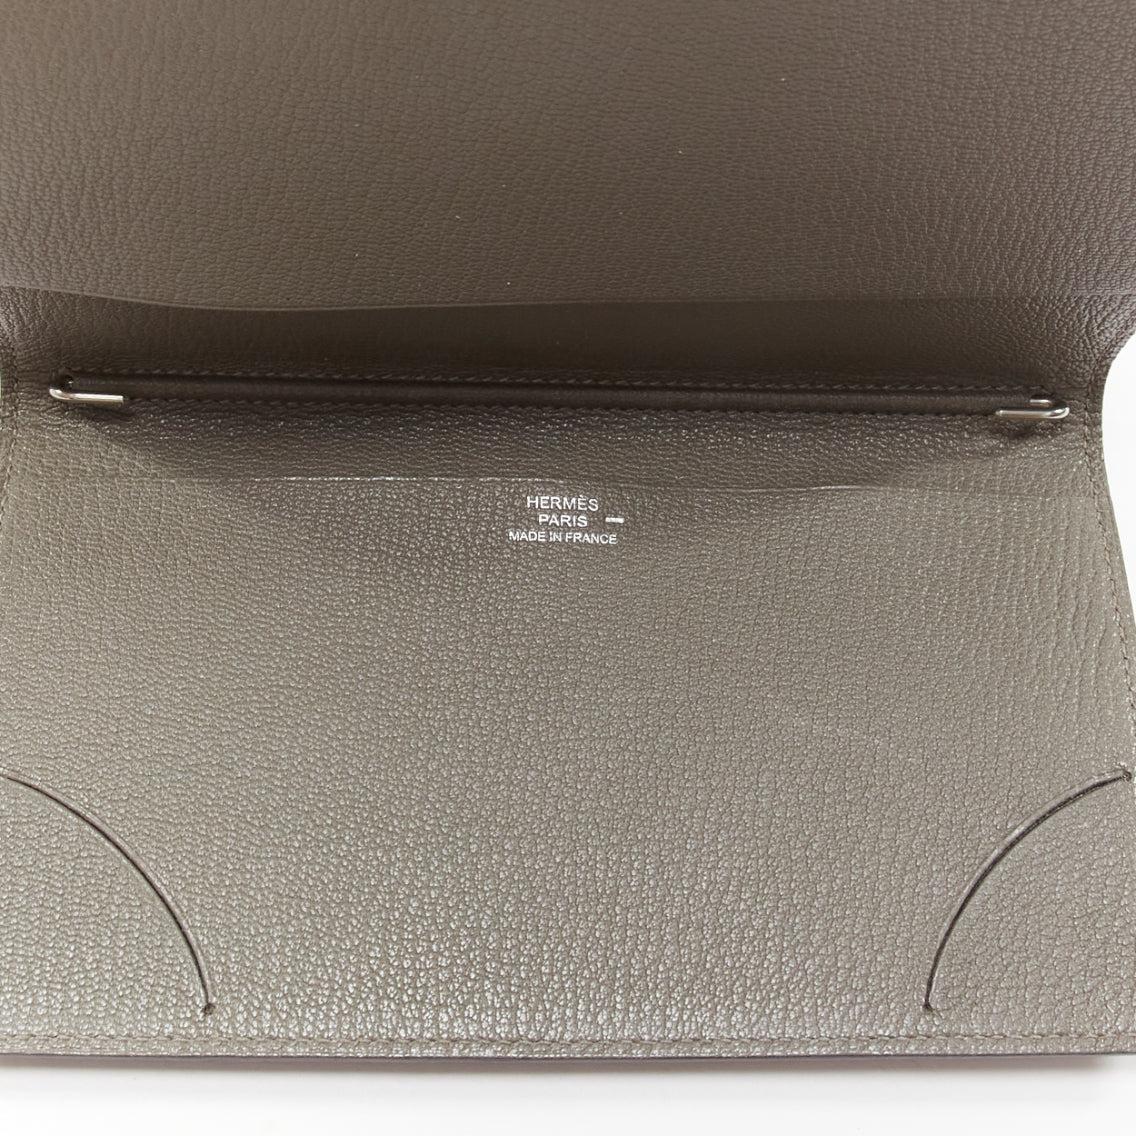 HERMES grey scaled leather silver hardware bifold long wallet
Reference: AAWC/A00983
Brand: Hermes
Material: Leather
Color: Grey
Pattern: Animal Print
Lining: Grey Leather
Made in: France

CONDITION:
Condition: Excellent, this item was pre-owned and